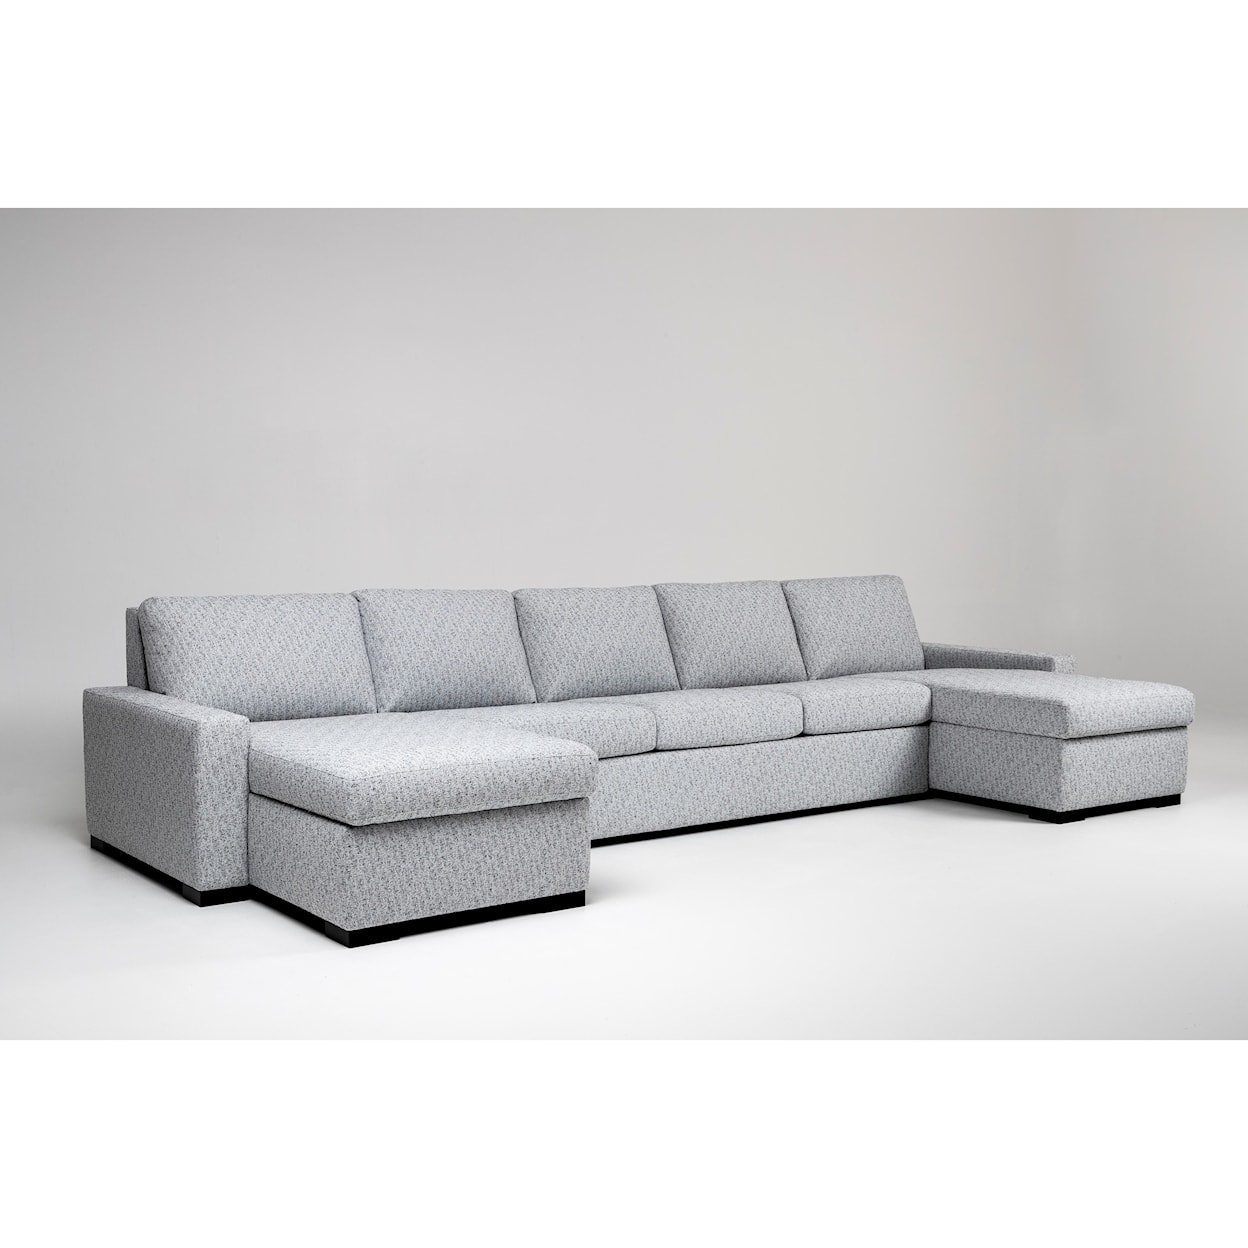 American Leather Rogue 5-Seat Sectional Sofa w/ Sleeper